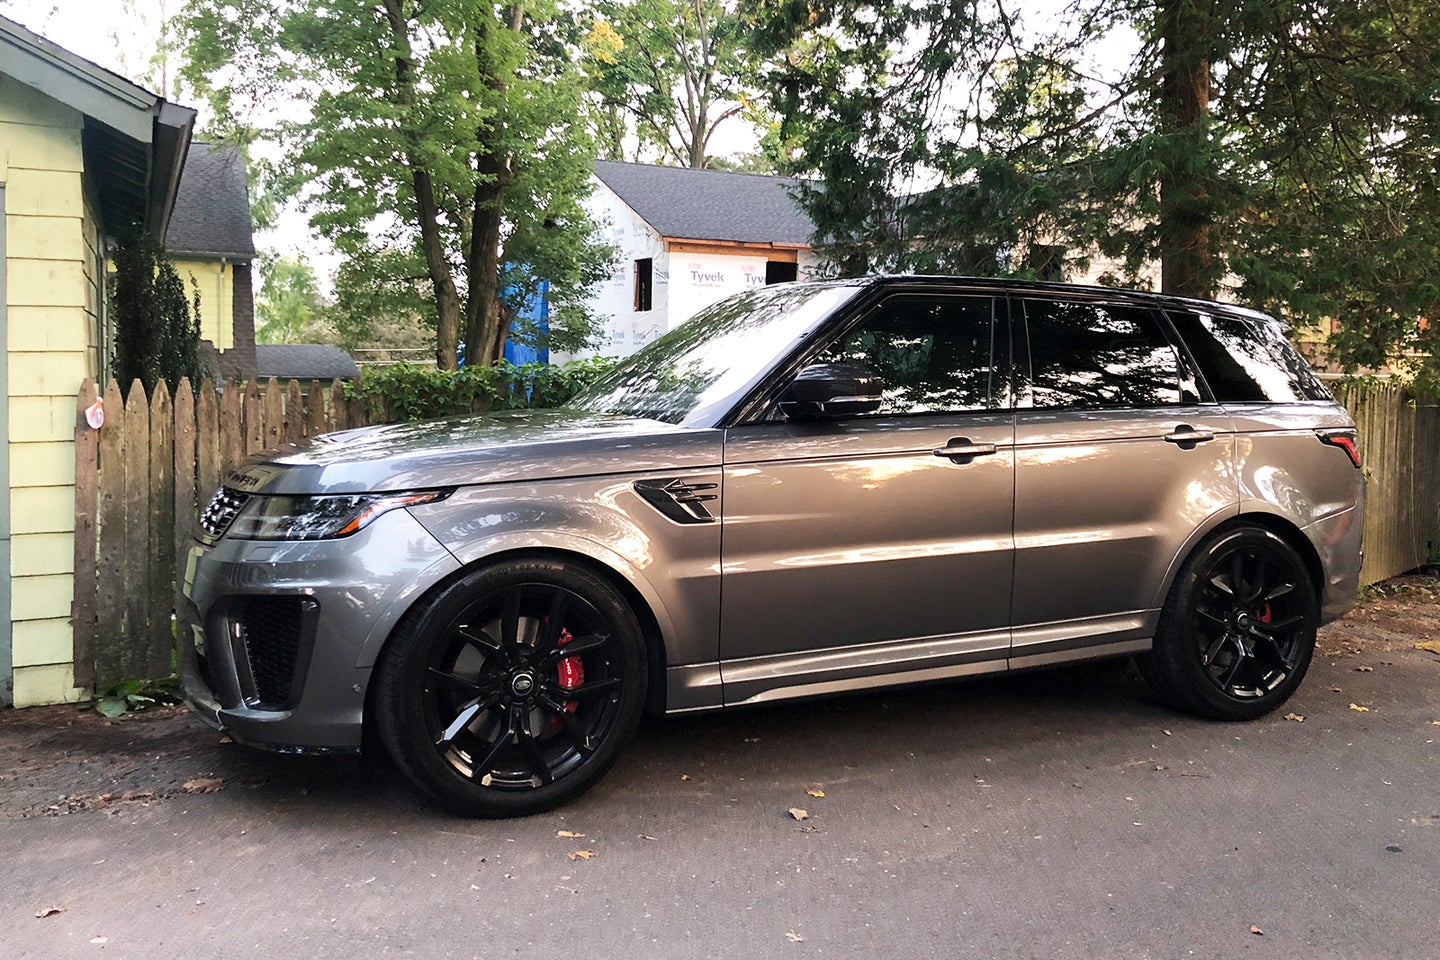 2018 Land Rover Range Rover Sport SVR Review: The Wedding Ride This Bride Never Knew She Needed